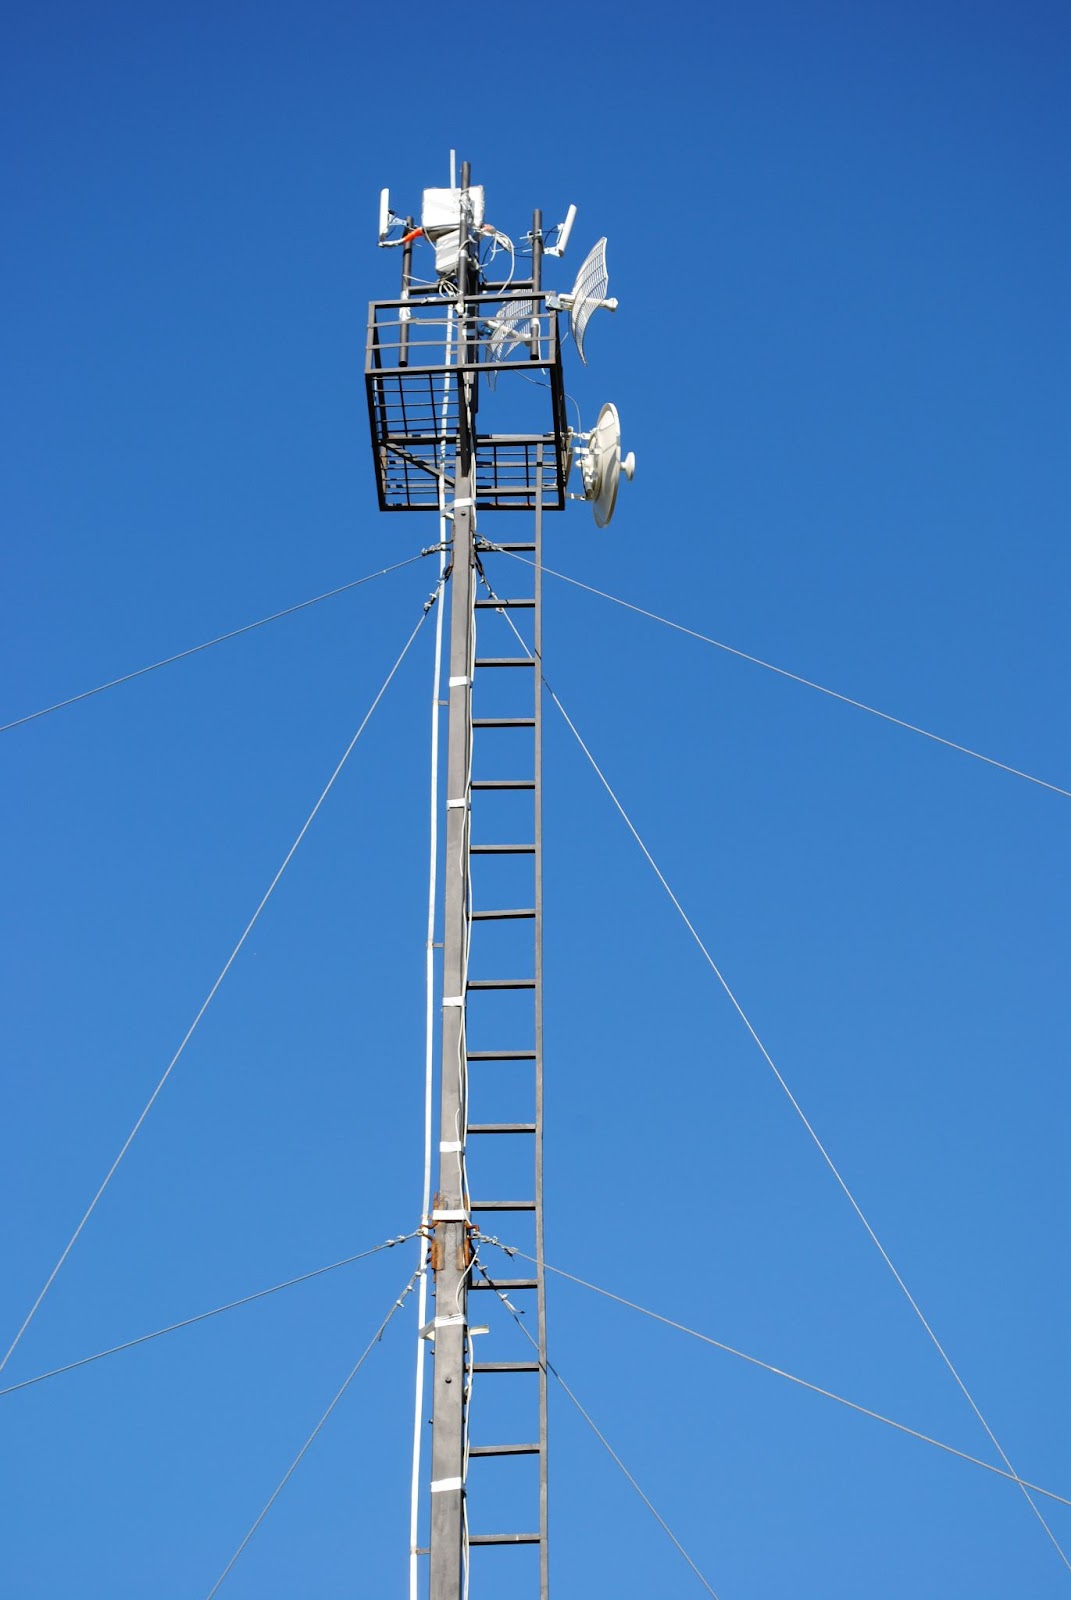 Tower technicians often climb to great heights to do their work